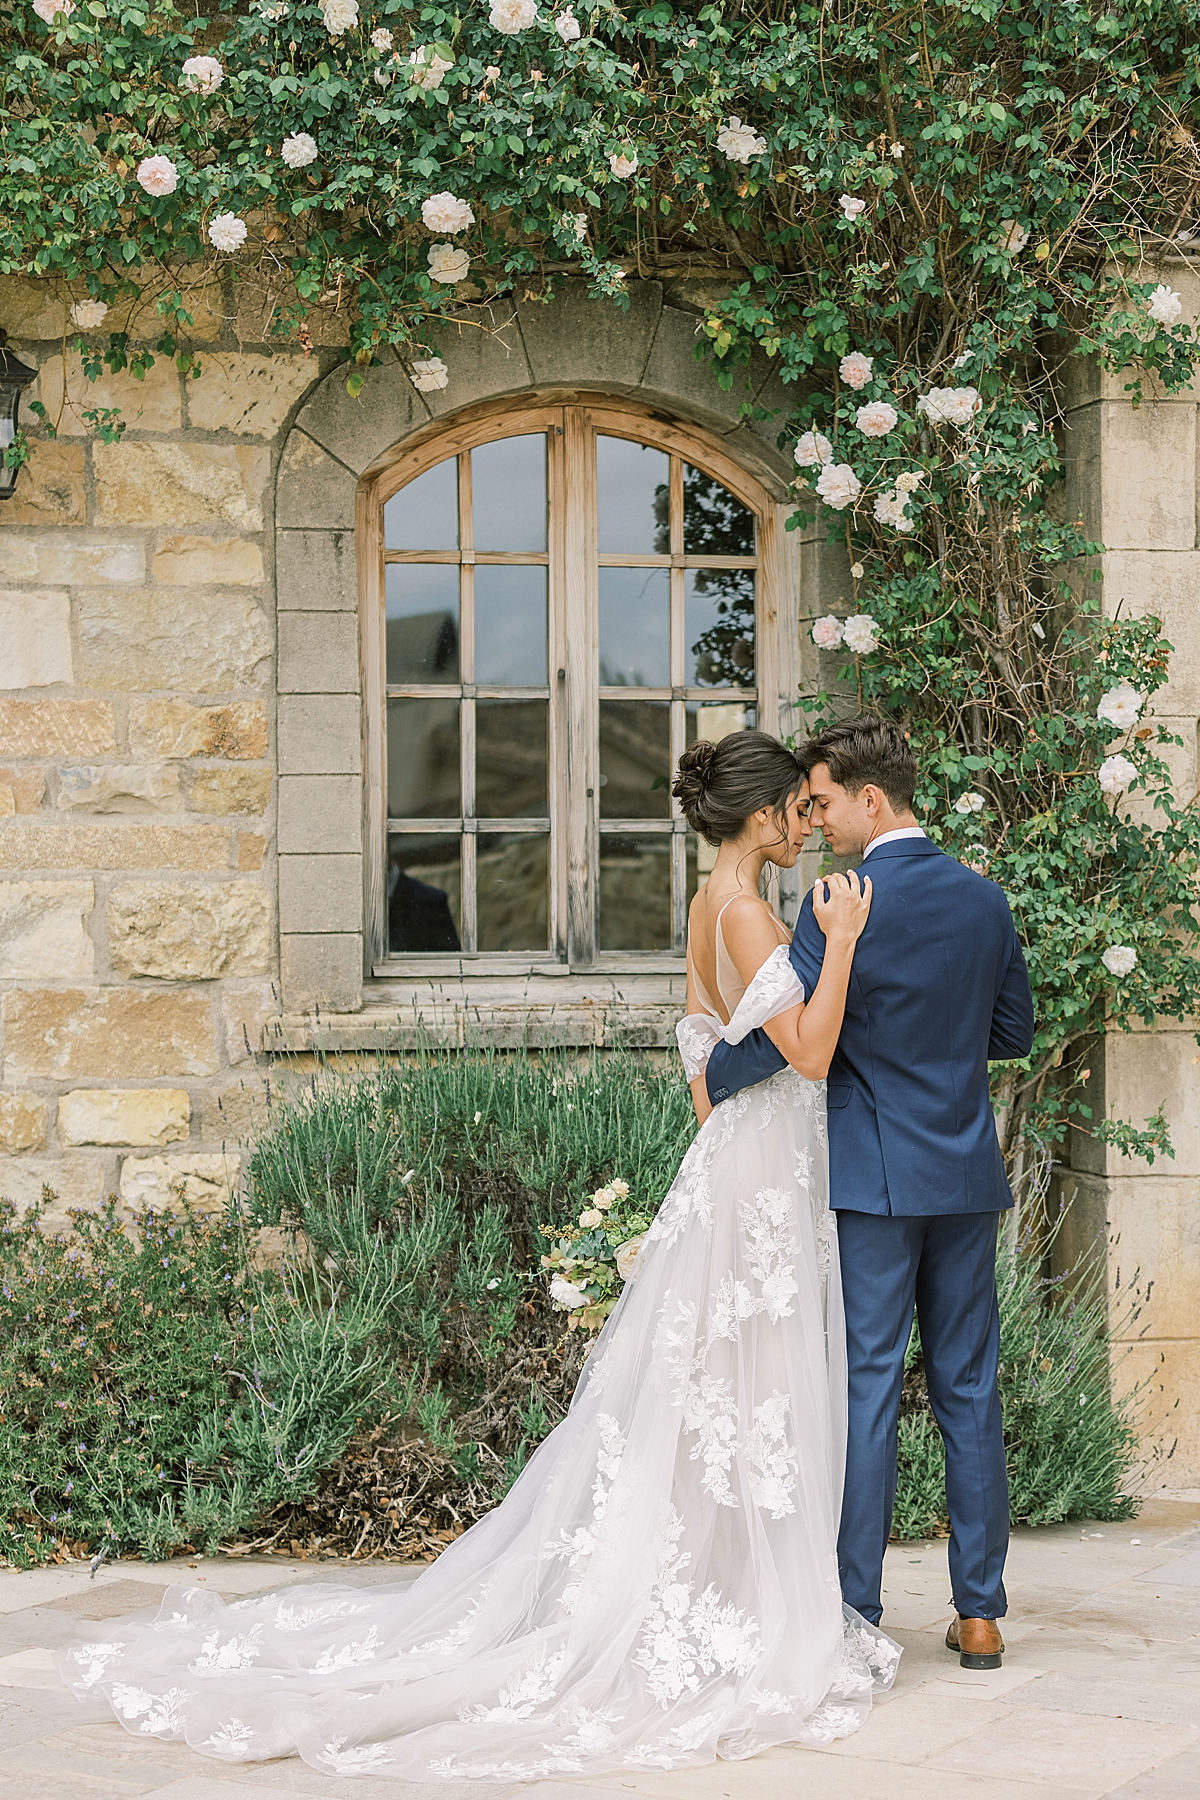 A bride and groom under a crawling vine decorated with white roses.